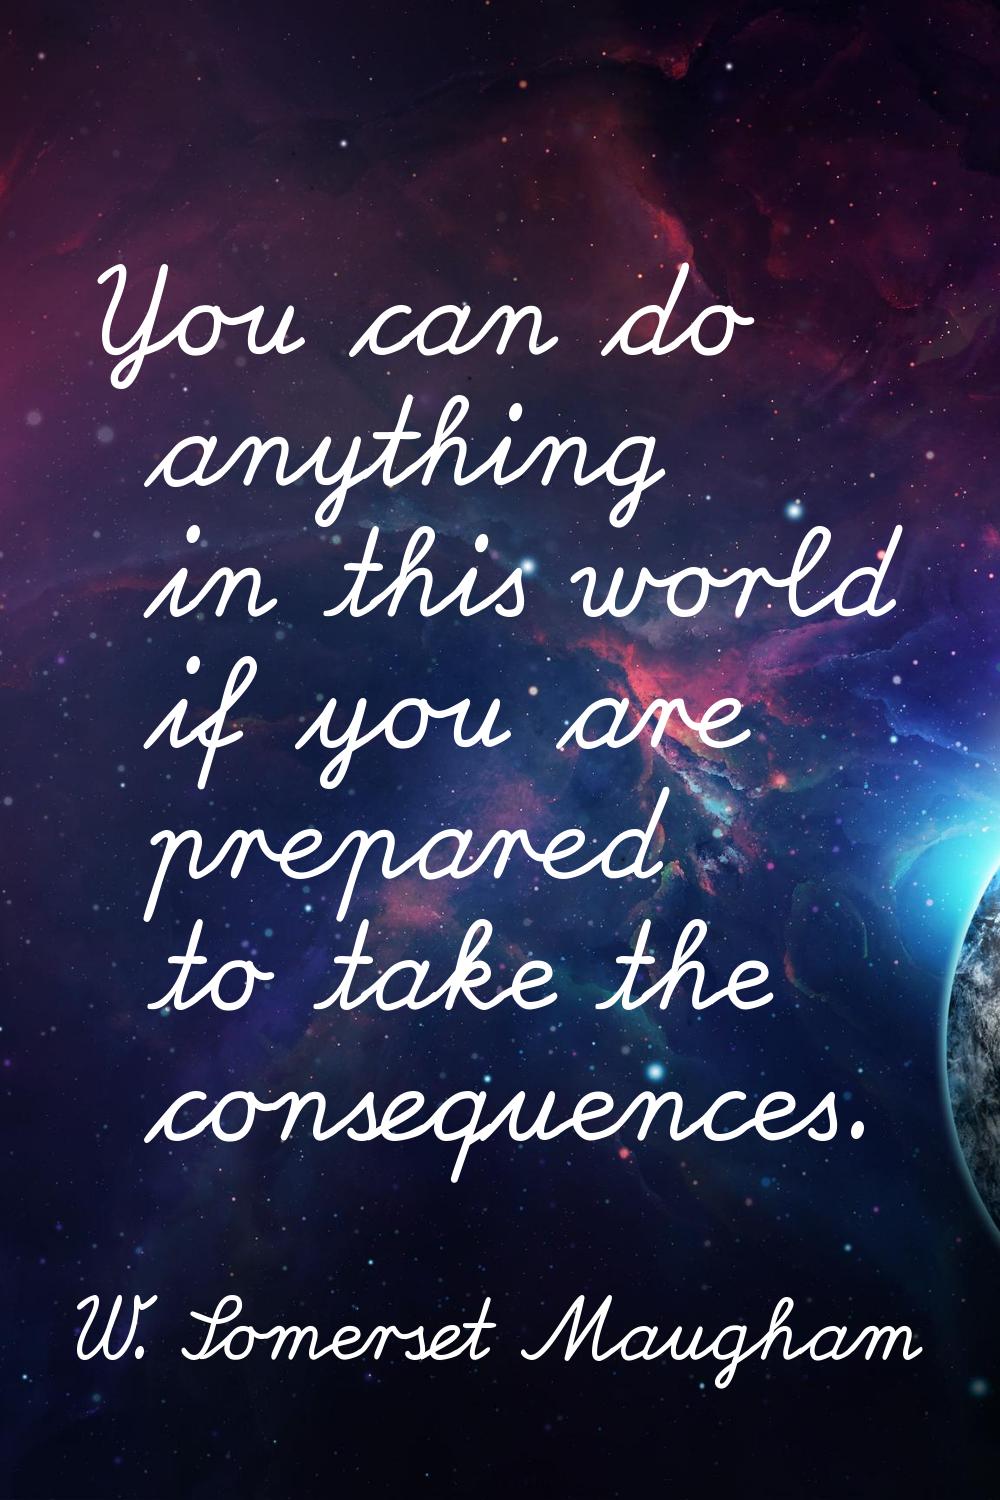 You can do anything in this world if you are prepared to take the consequences.